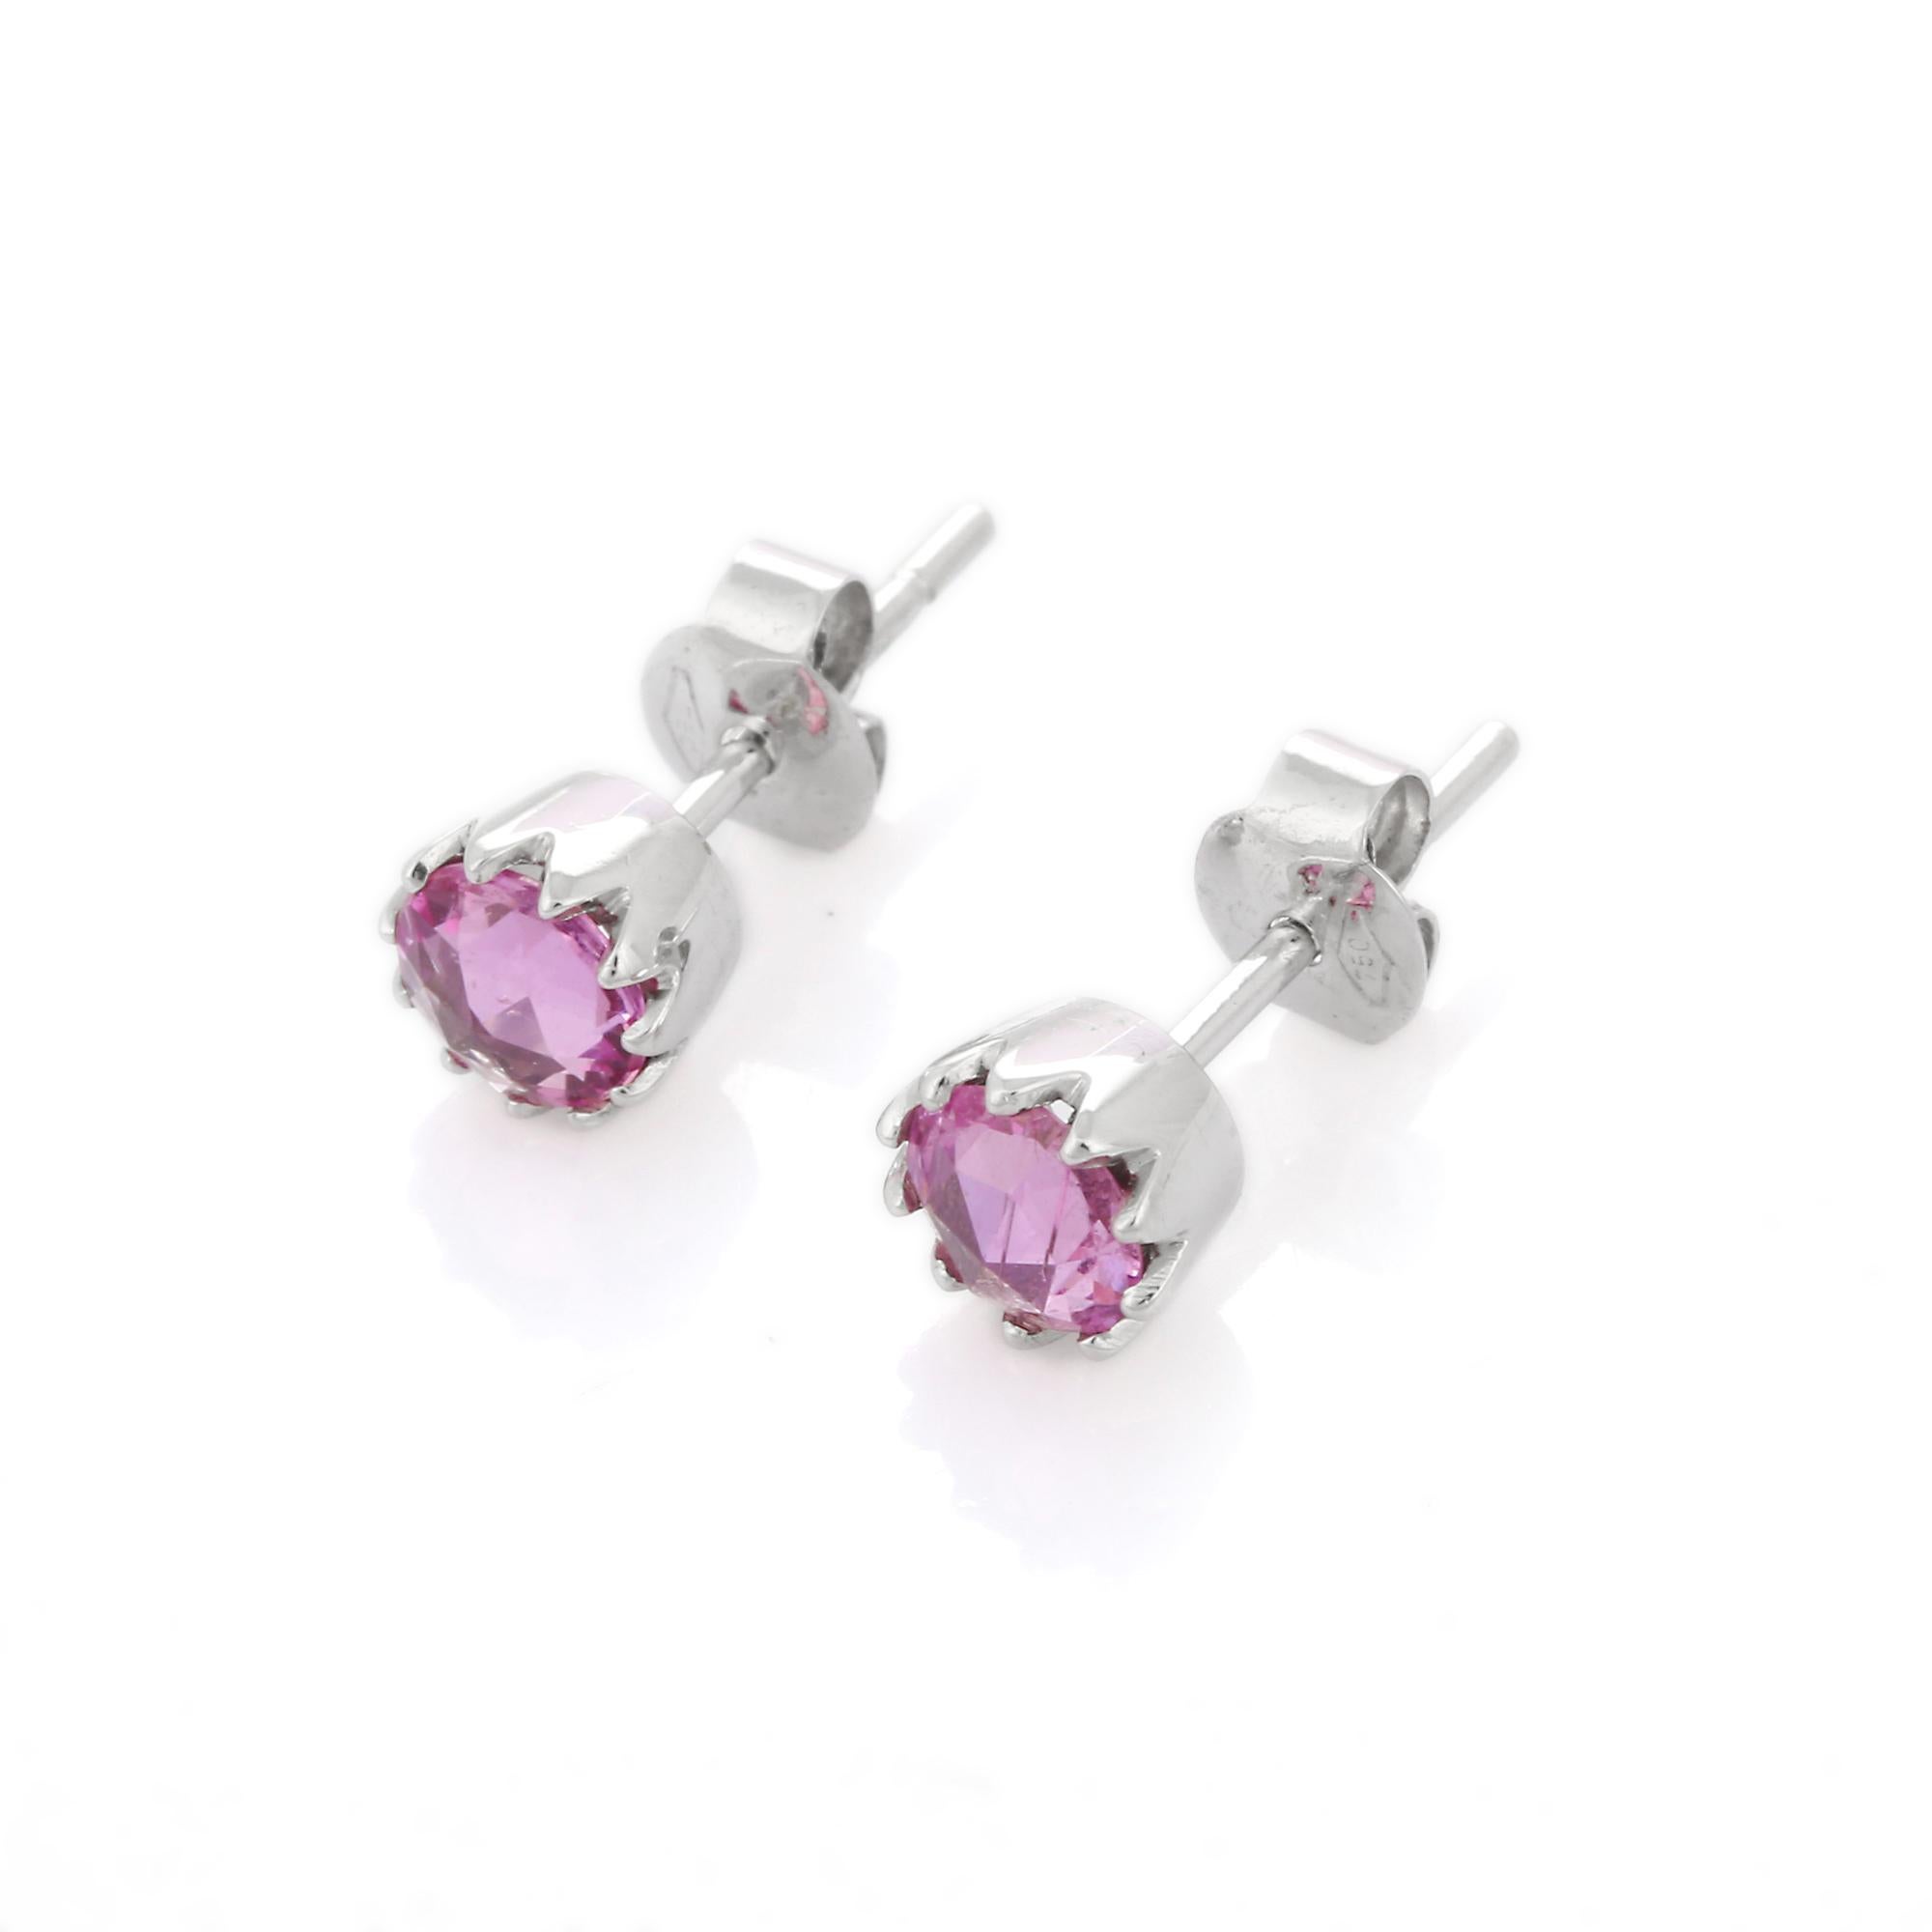 Studs create a subtle beauty while showcasing the colors of the natural precious gemstones and illuminating diamonds making a statement.

Round cut pink sapphire studs with diamonds in 18K gold. Embrace your look with these stunning pair of earrings